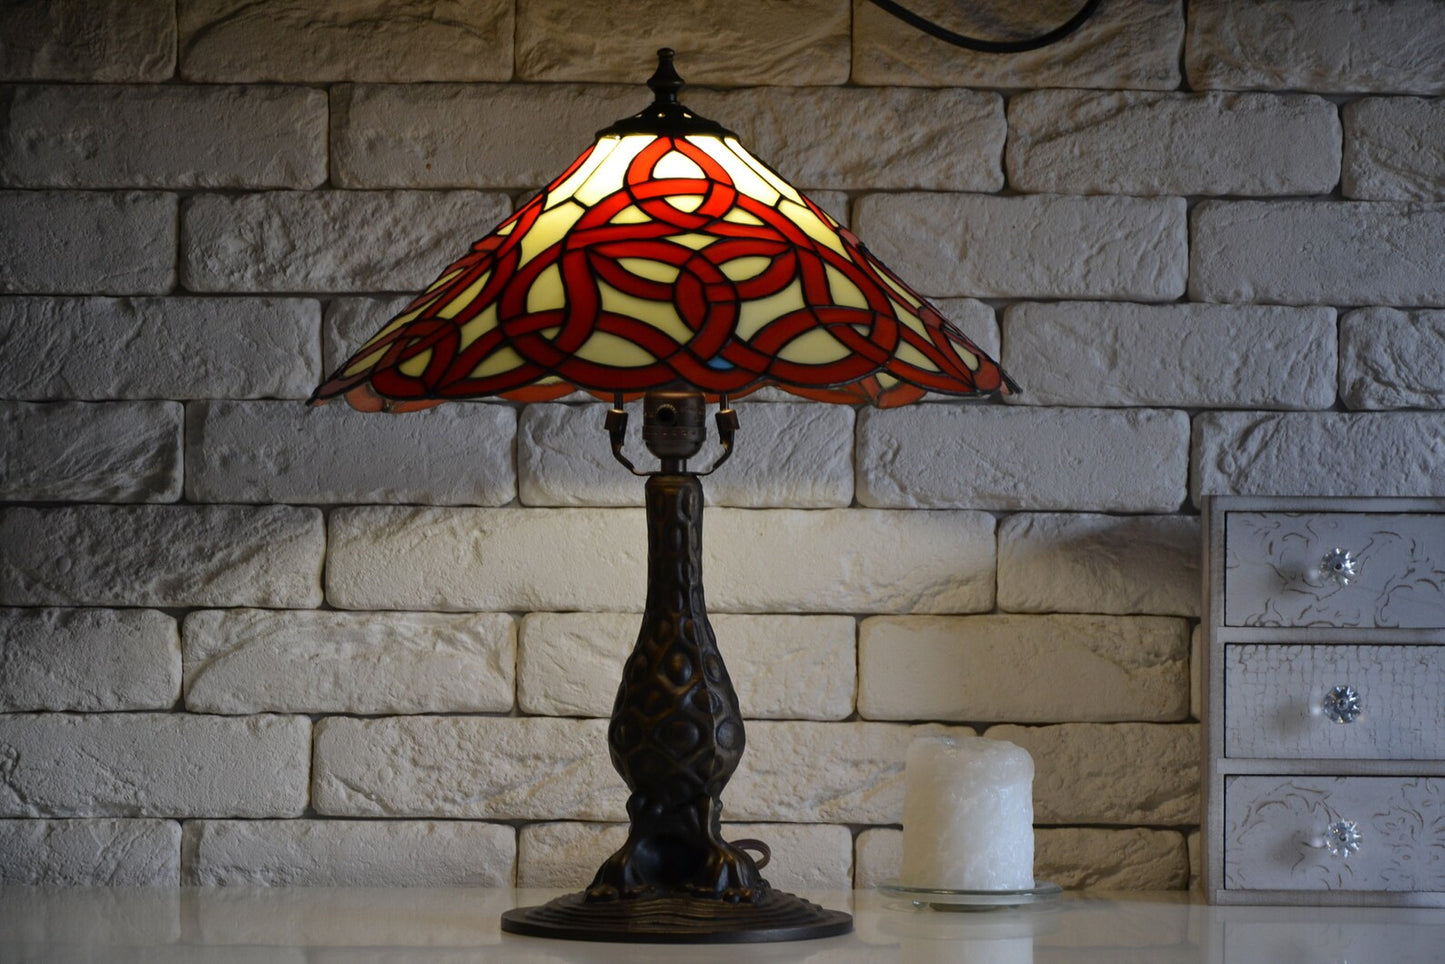 Tiffany lamp Table lamp Stained glass desk lamp Mother's day gift Uroboros pattern Tiffany style lamp Bronze base Red lamp